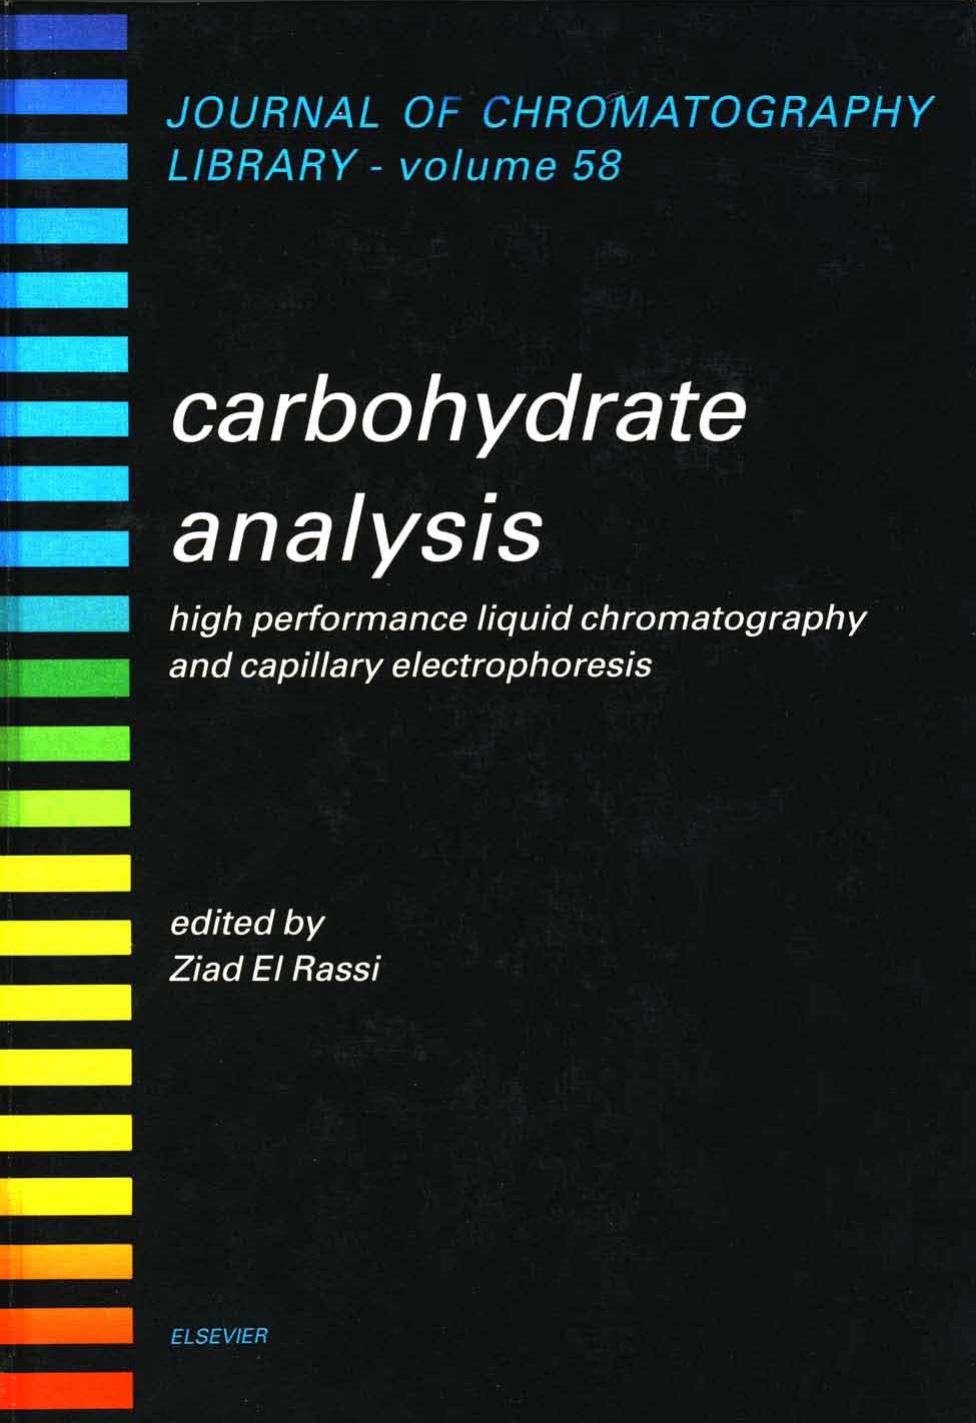 Carbohydrate Analysis : High Performance Liquid Chromatography and Capillary Electrophoresis by El Rassi Ziad